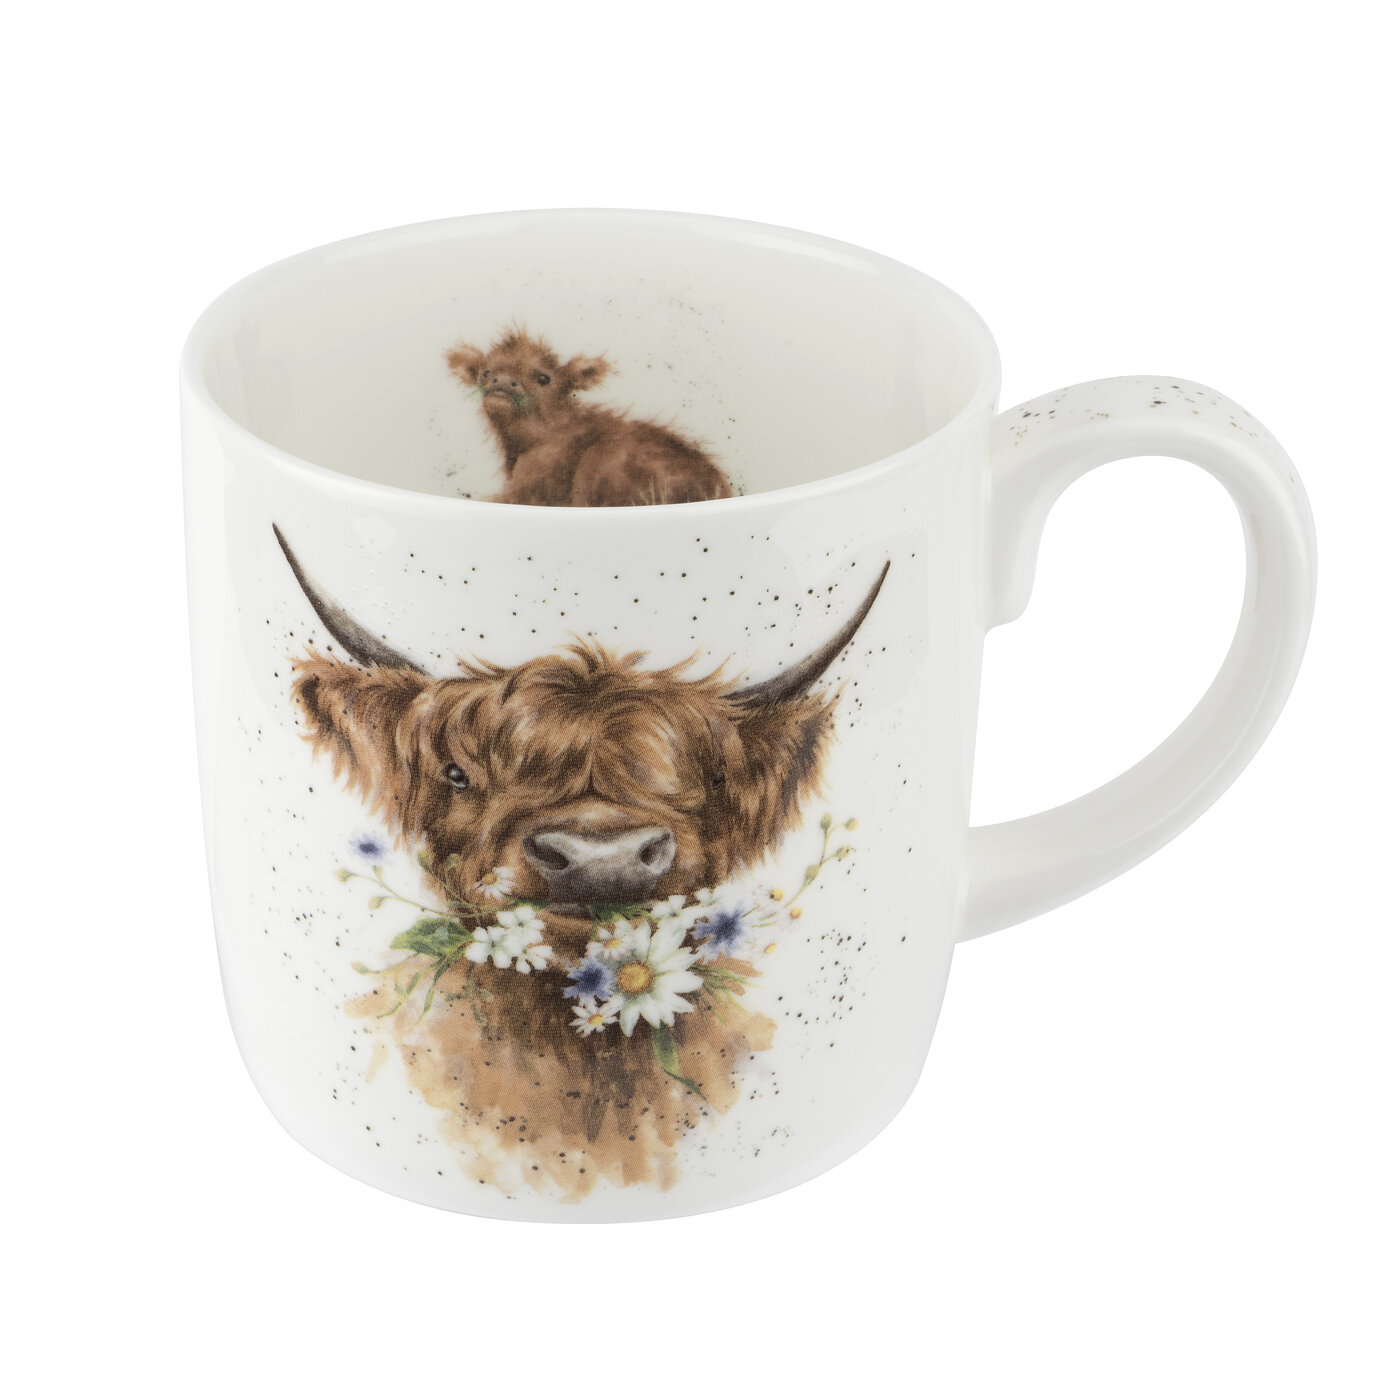 Daisy- Coo 14 Ounce Mug (Cow) image number null